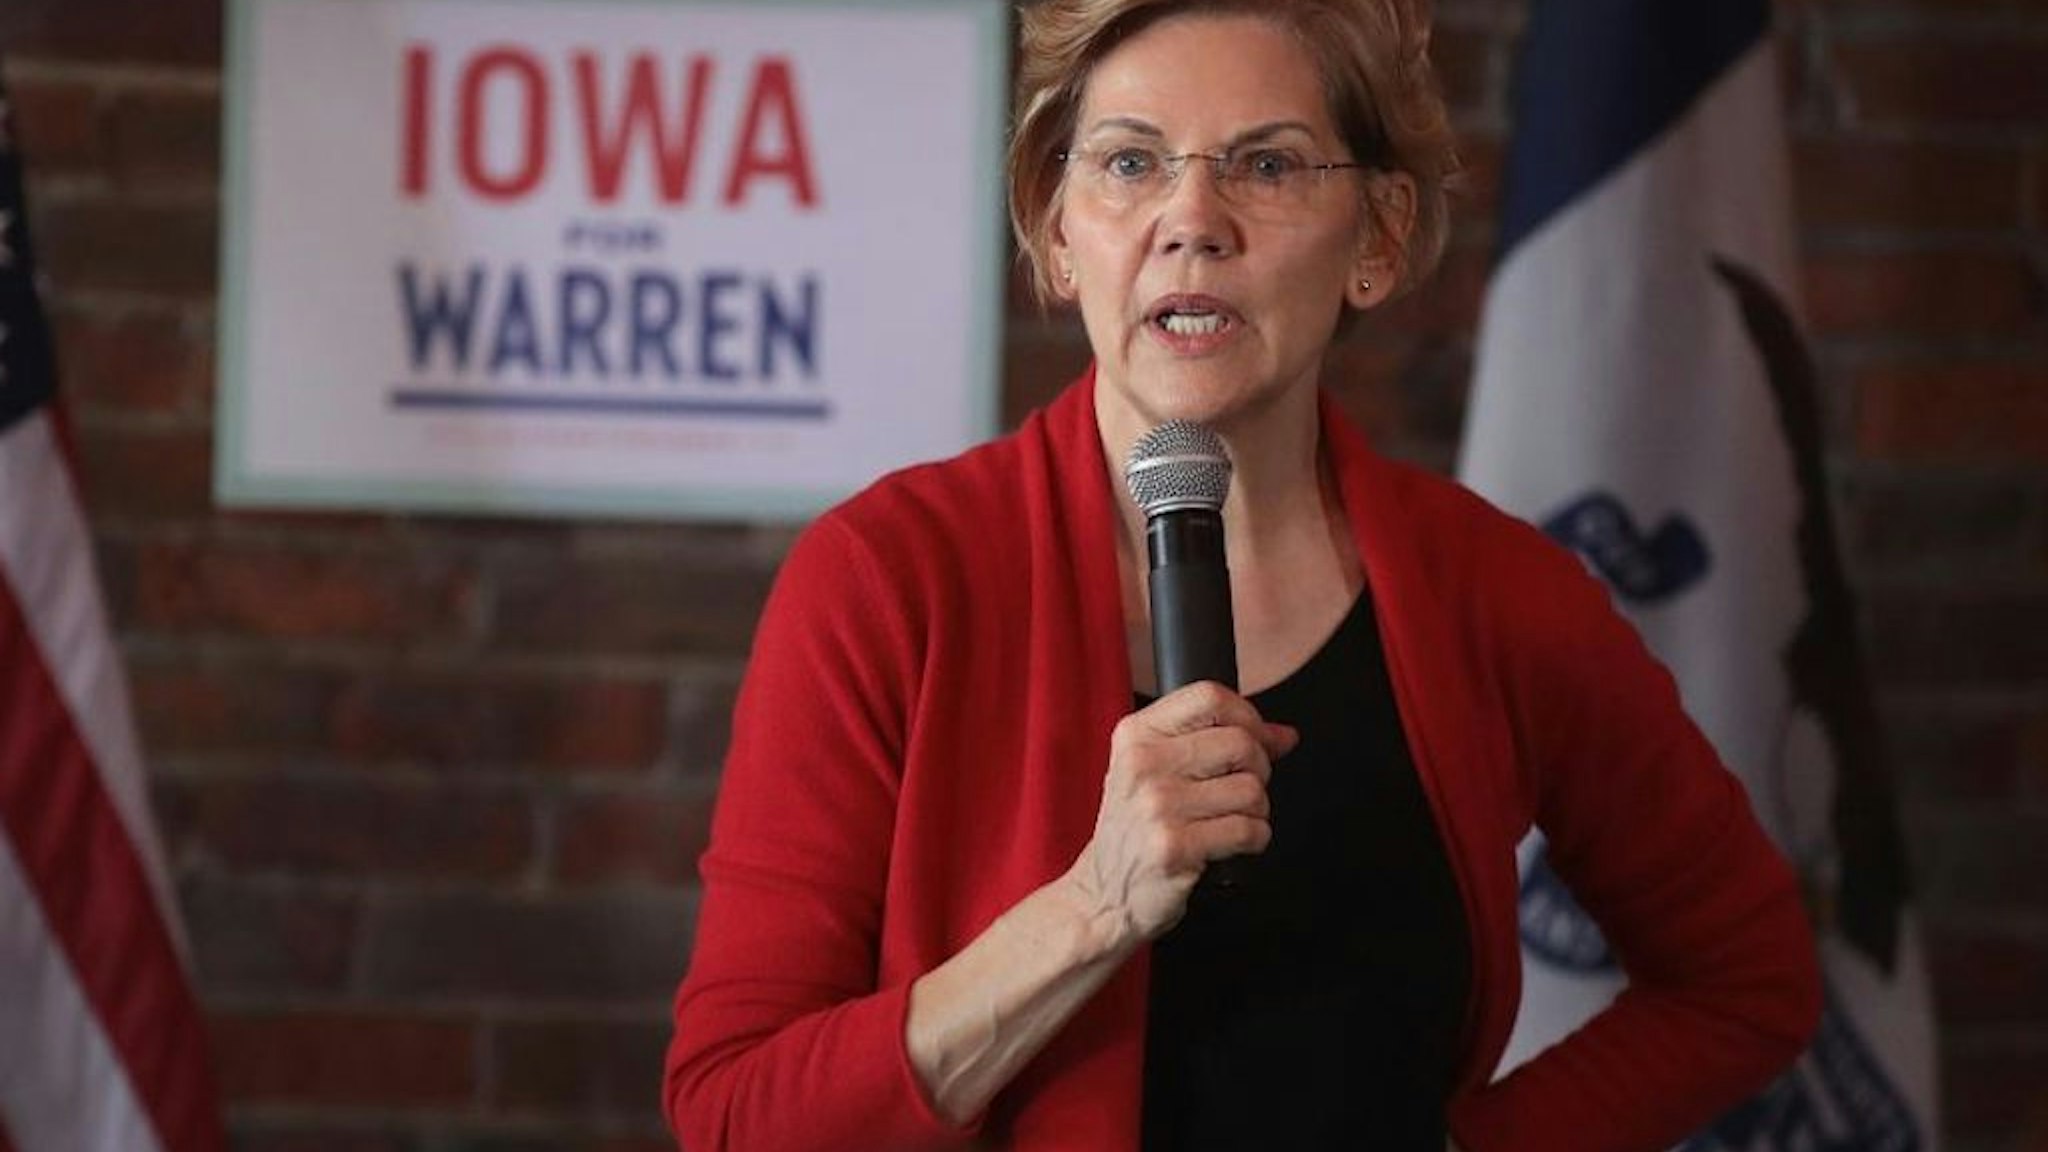 DUBUQUE, IOWA - MARCH 01: Sen. Elizabeth Warren (D-MA) speaks at a campaign rally at the Stone Cliff Winery on March 1, 2019 in Dubuque, Iowa. Warren is campaigning in the state with the hopes of securing the 2020 Democratic presidential nomination.